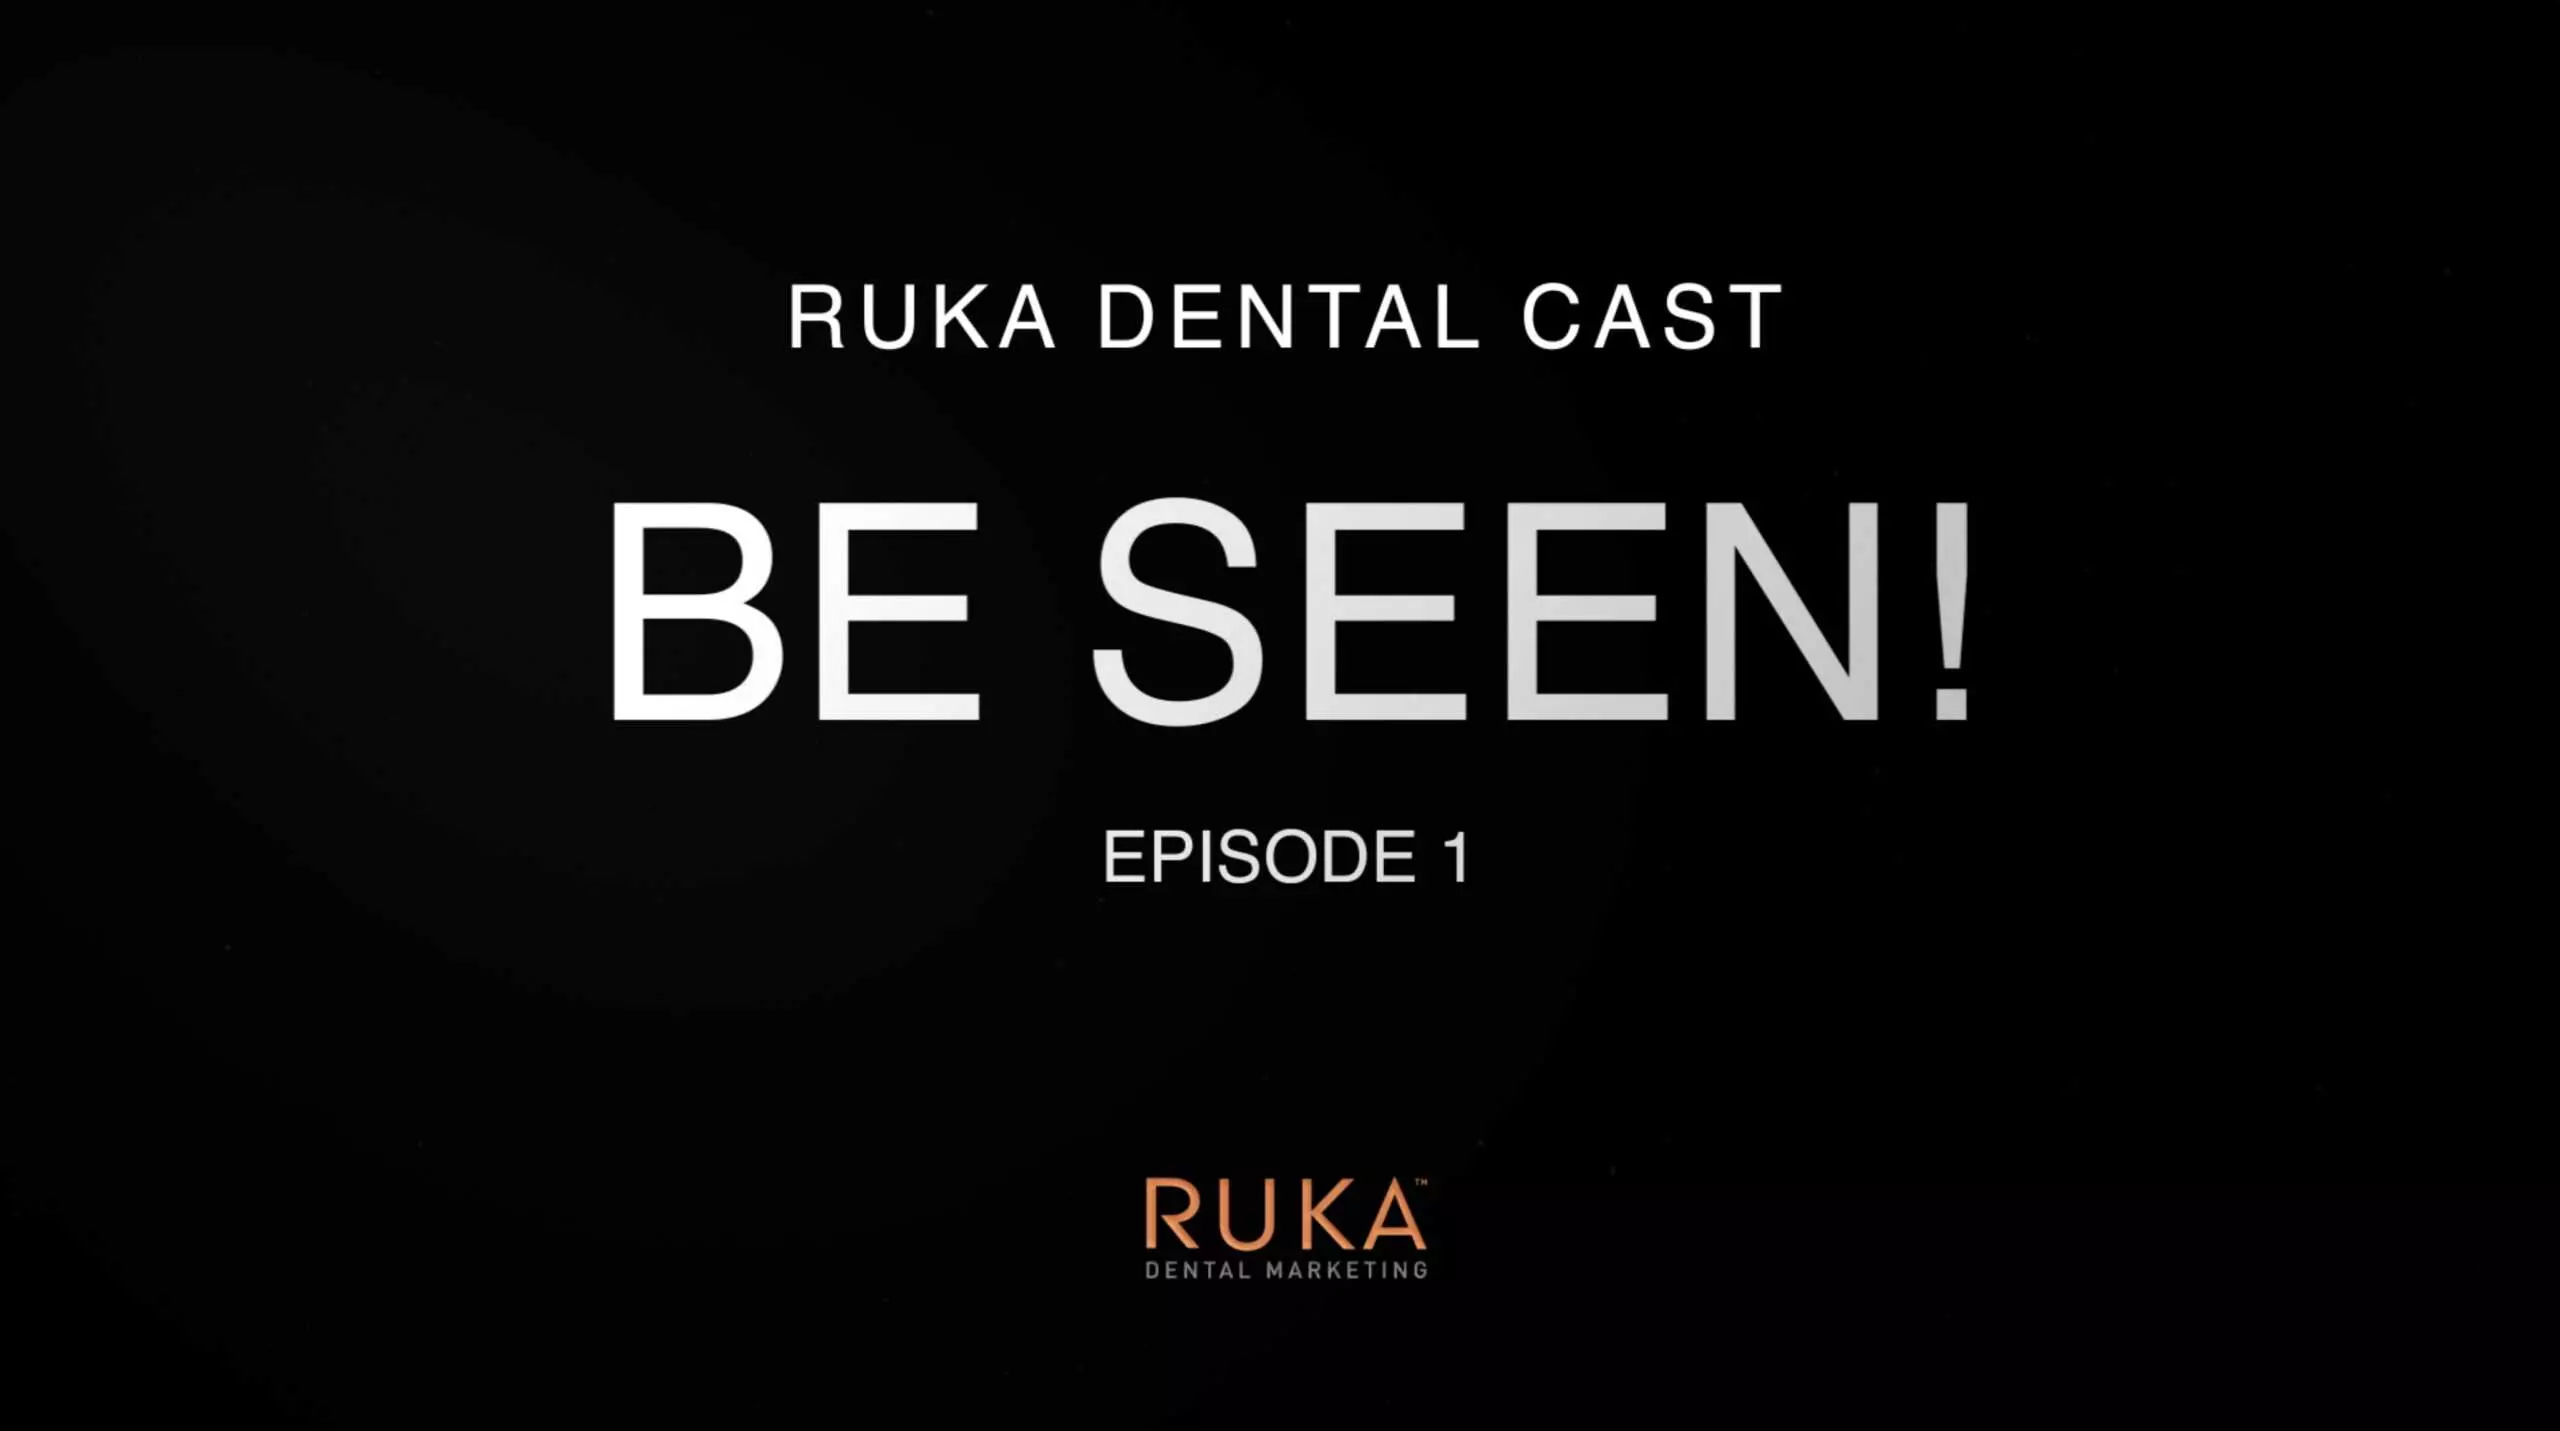 How to reach new dental patients using Ruka dental cast episode 1.